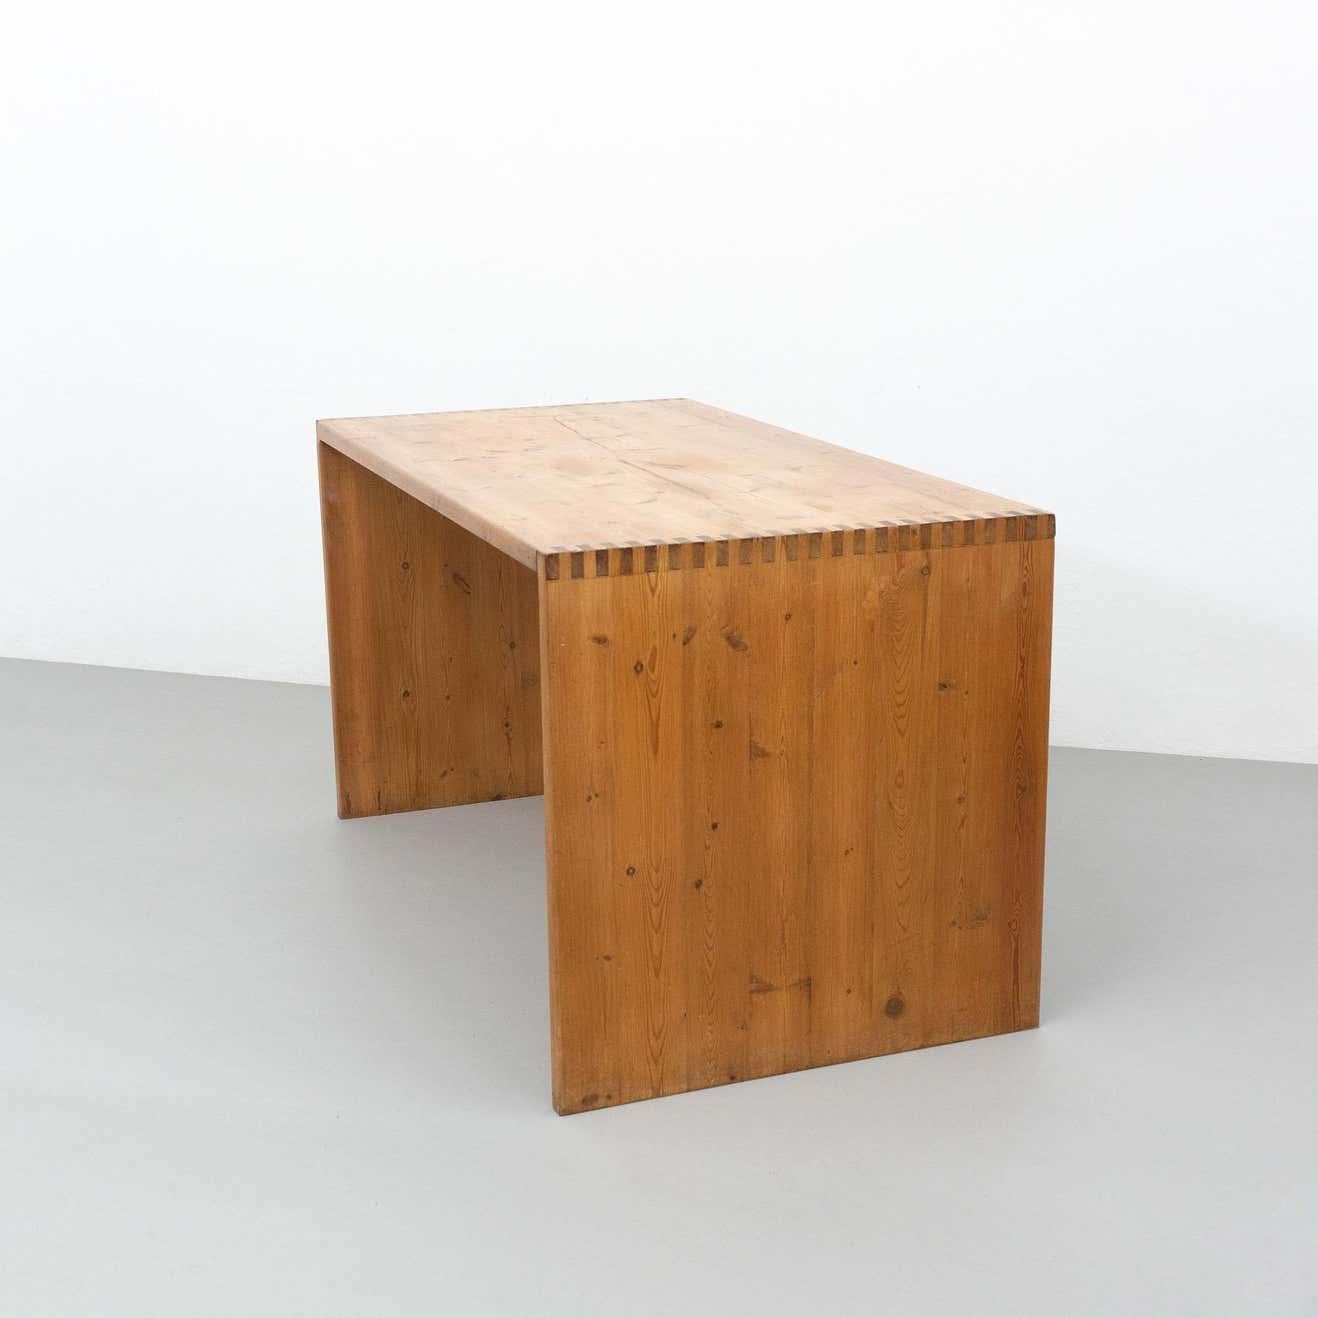 French Mid-Century Modern Rationalist Wood Table, circa 1960 For Sale